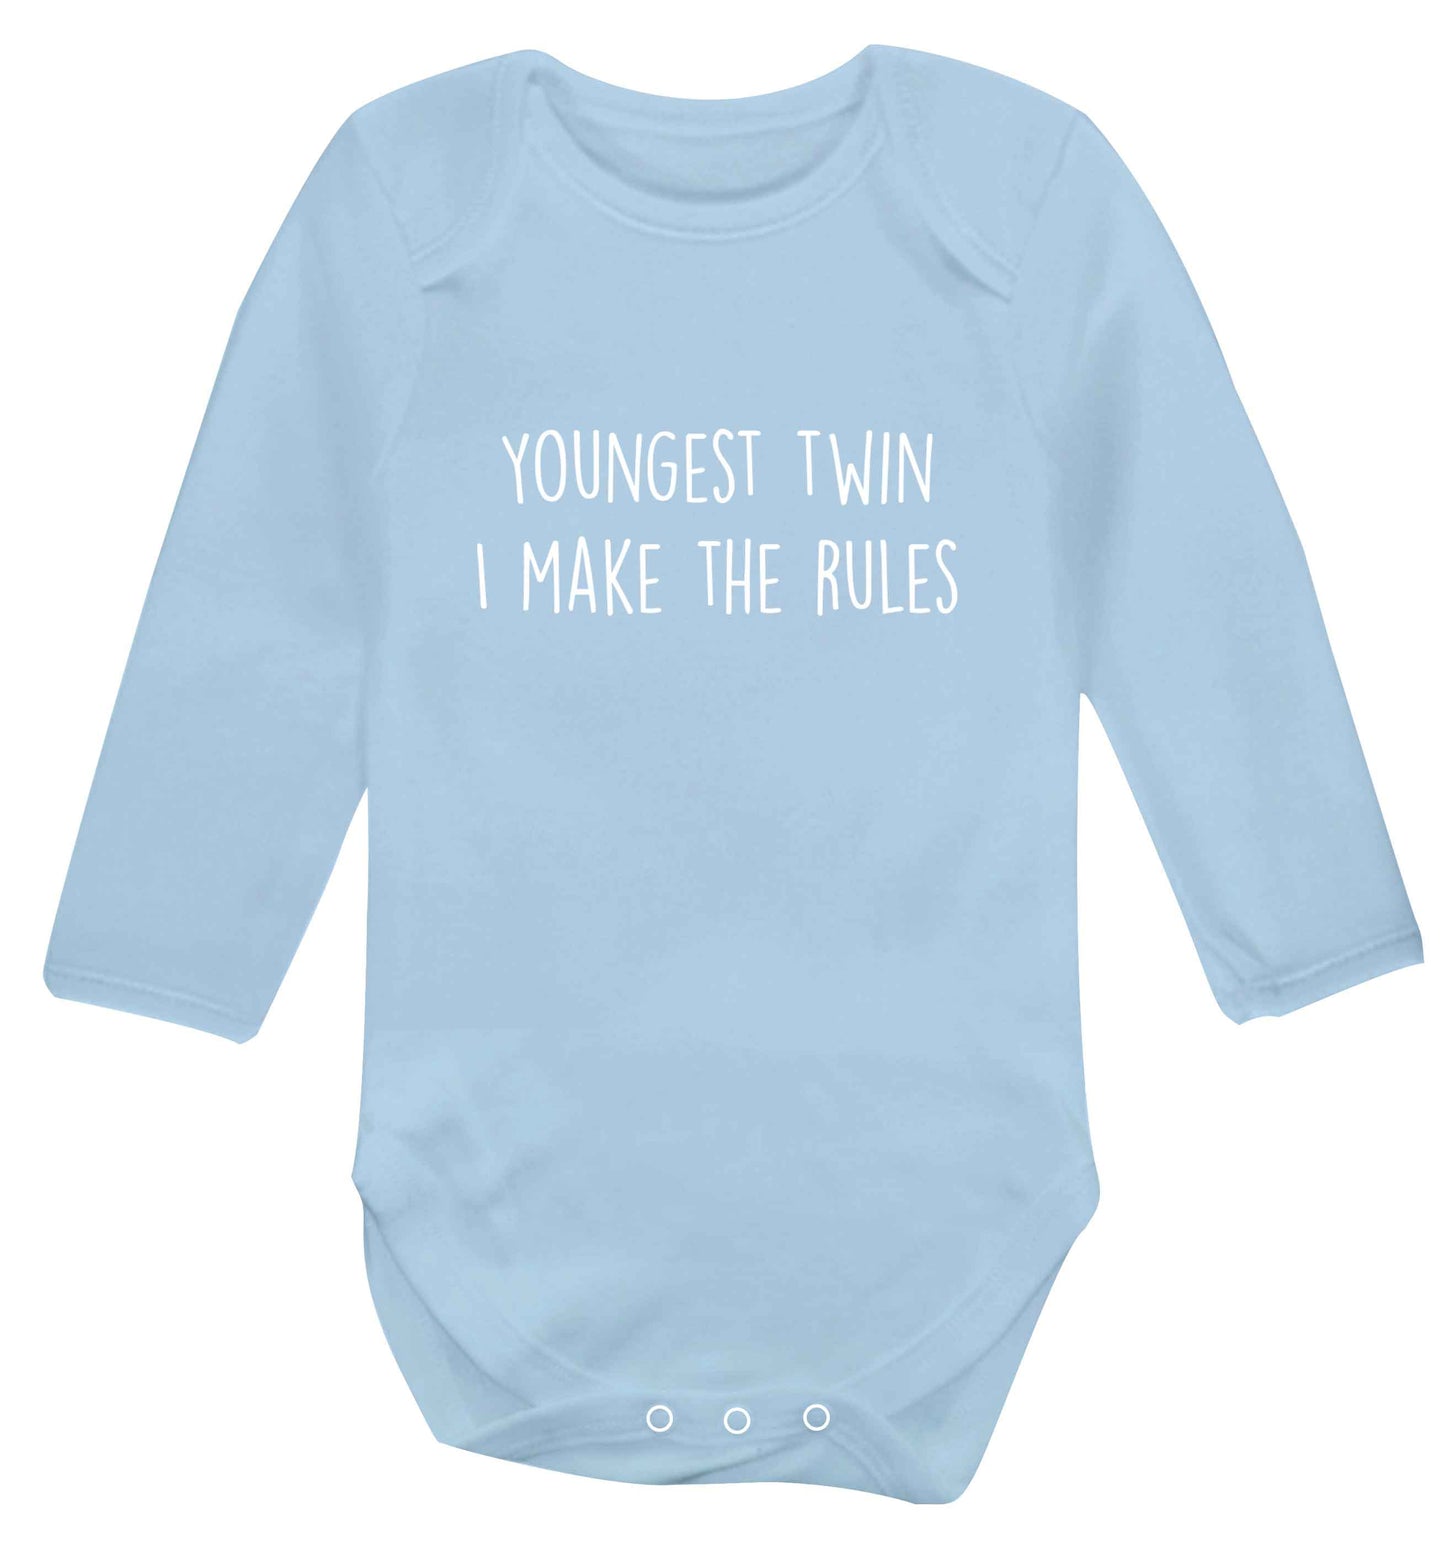 Youngest twin I make the rules baby vest long sleeved pale blue 6-12 months